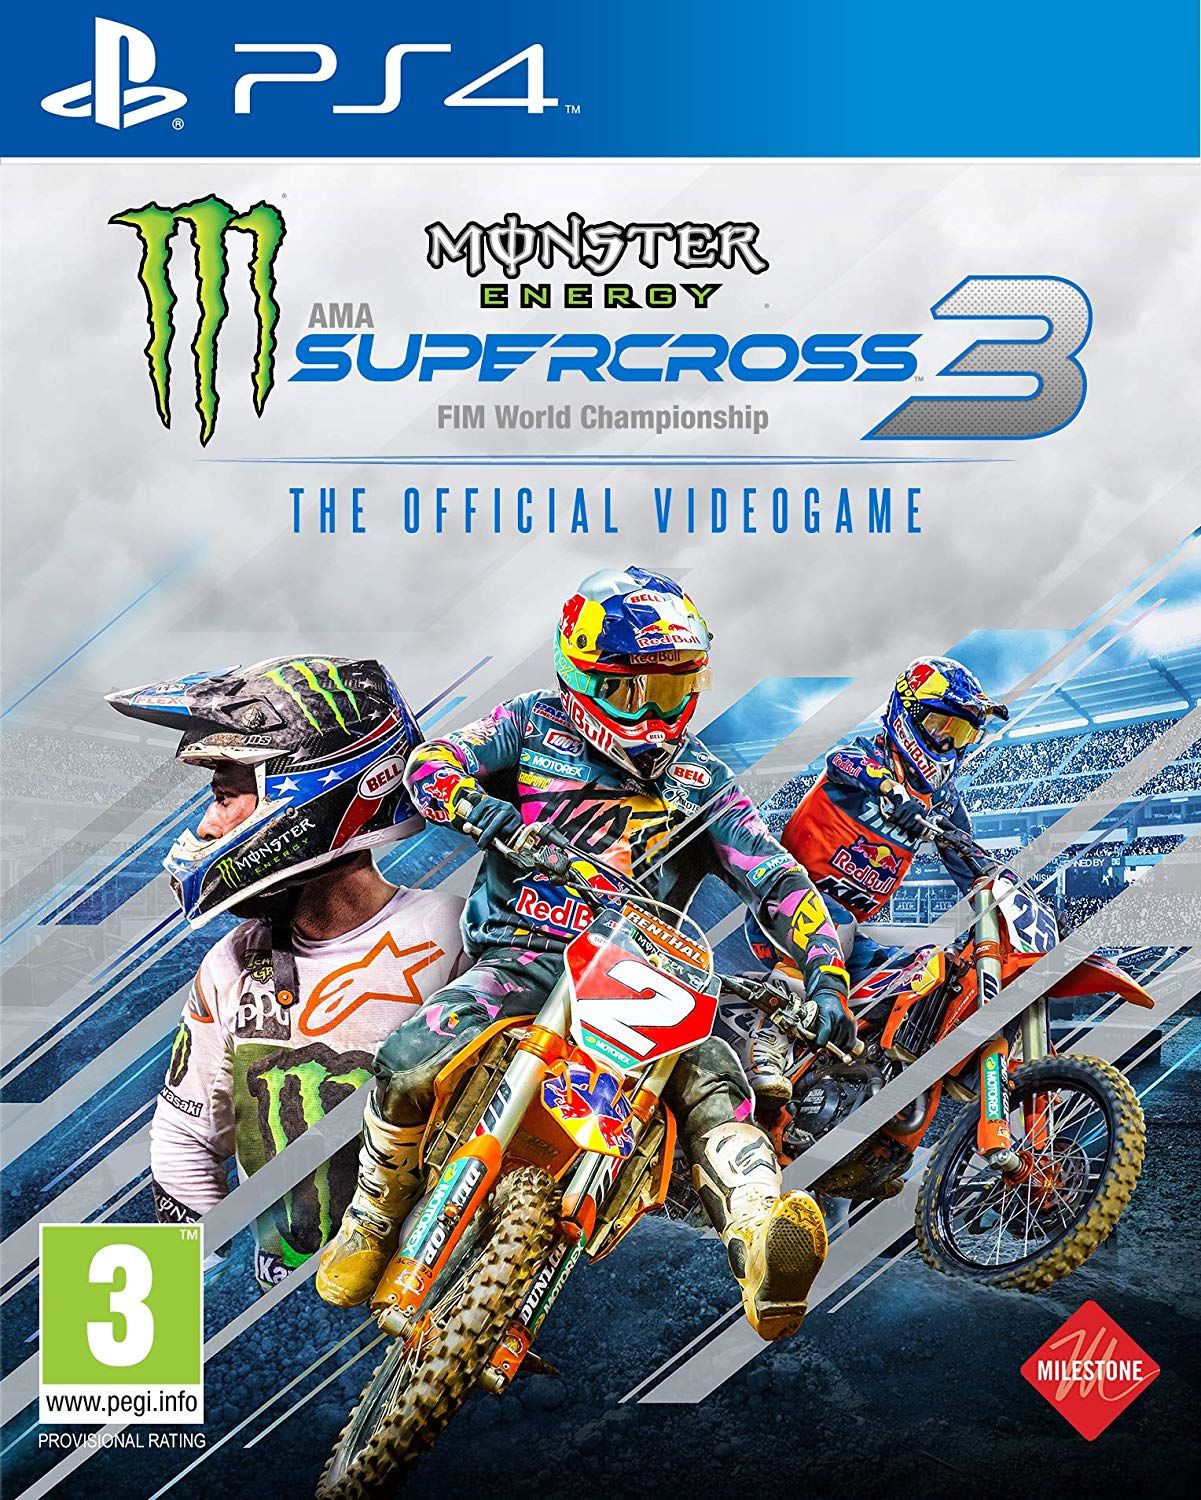 Monsters Energy Supercross - The Official Videogame 3